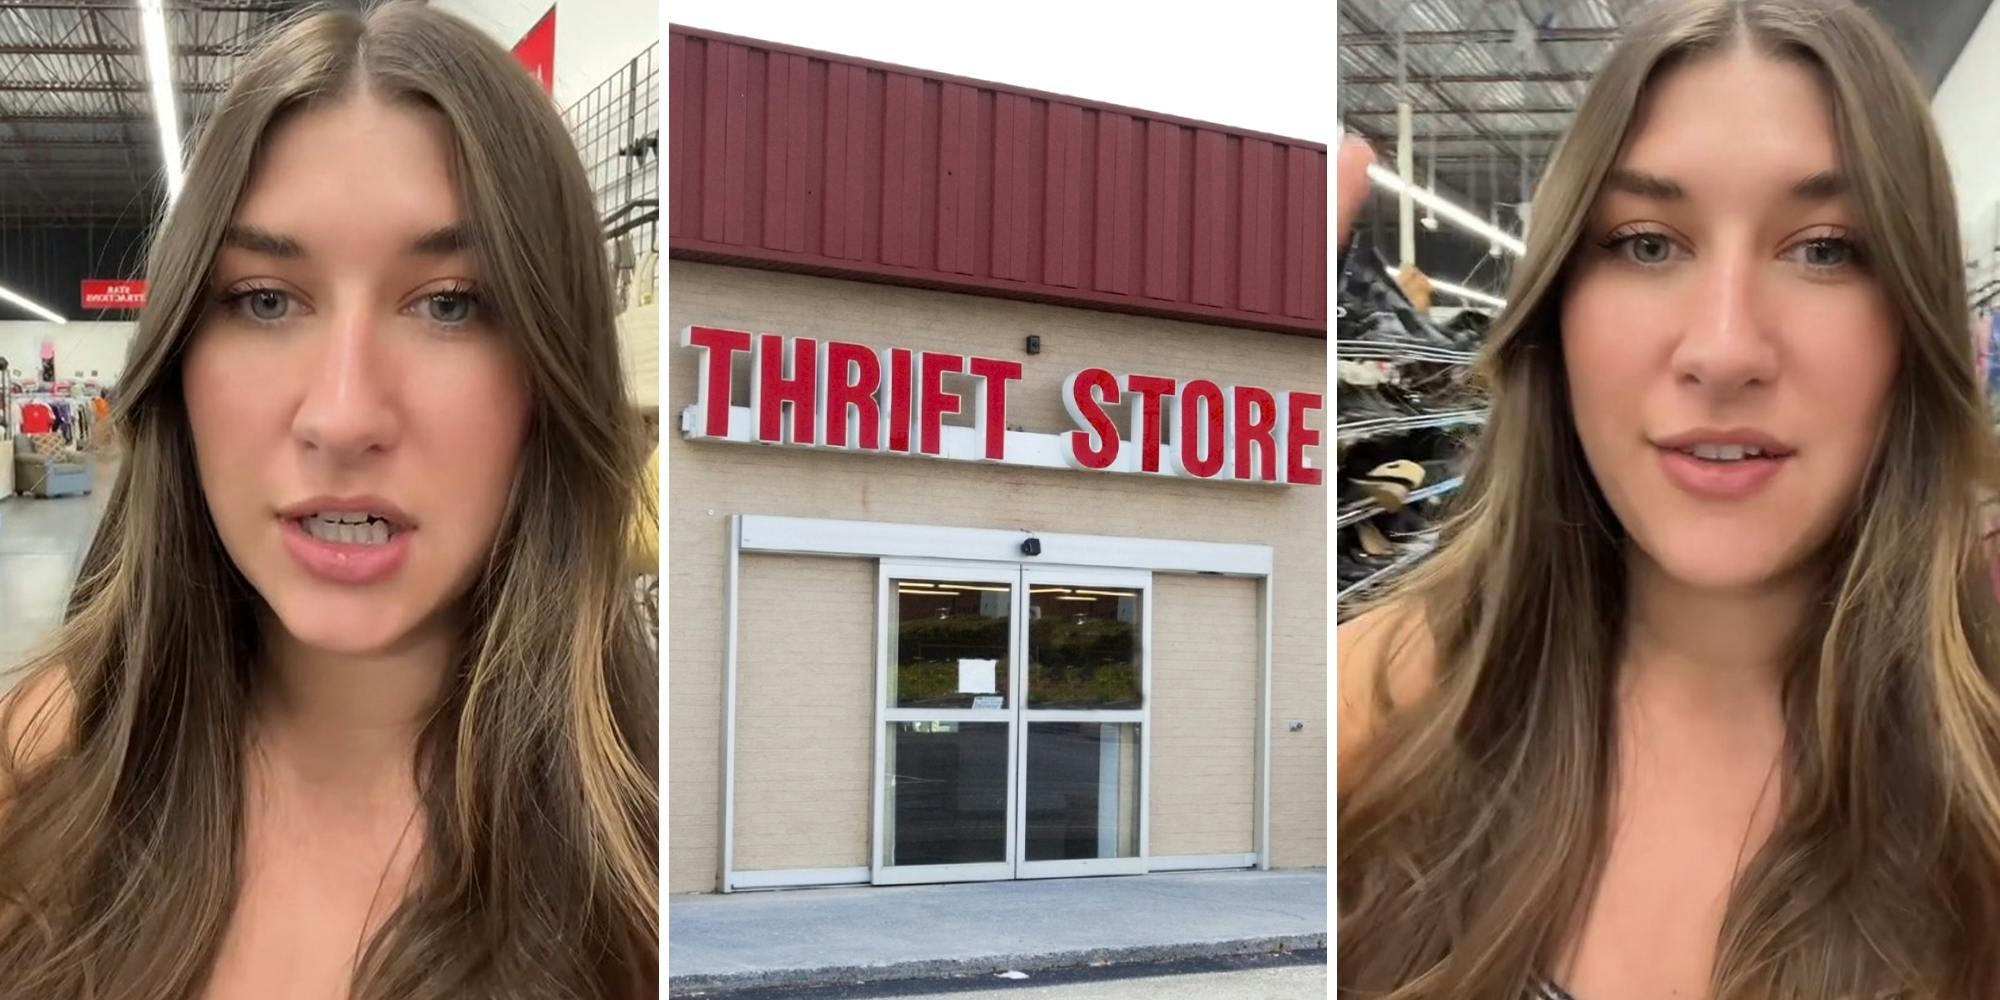 Woman catches her local thrift store selling Target body spray—she can’t believe for how much